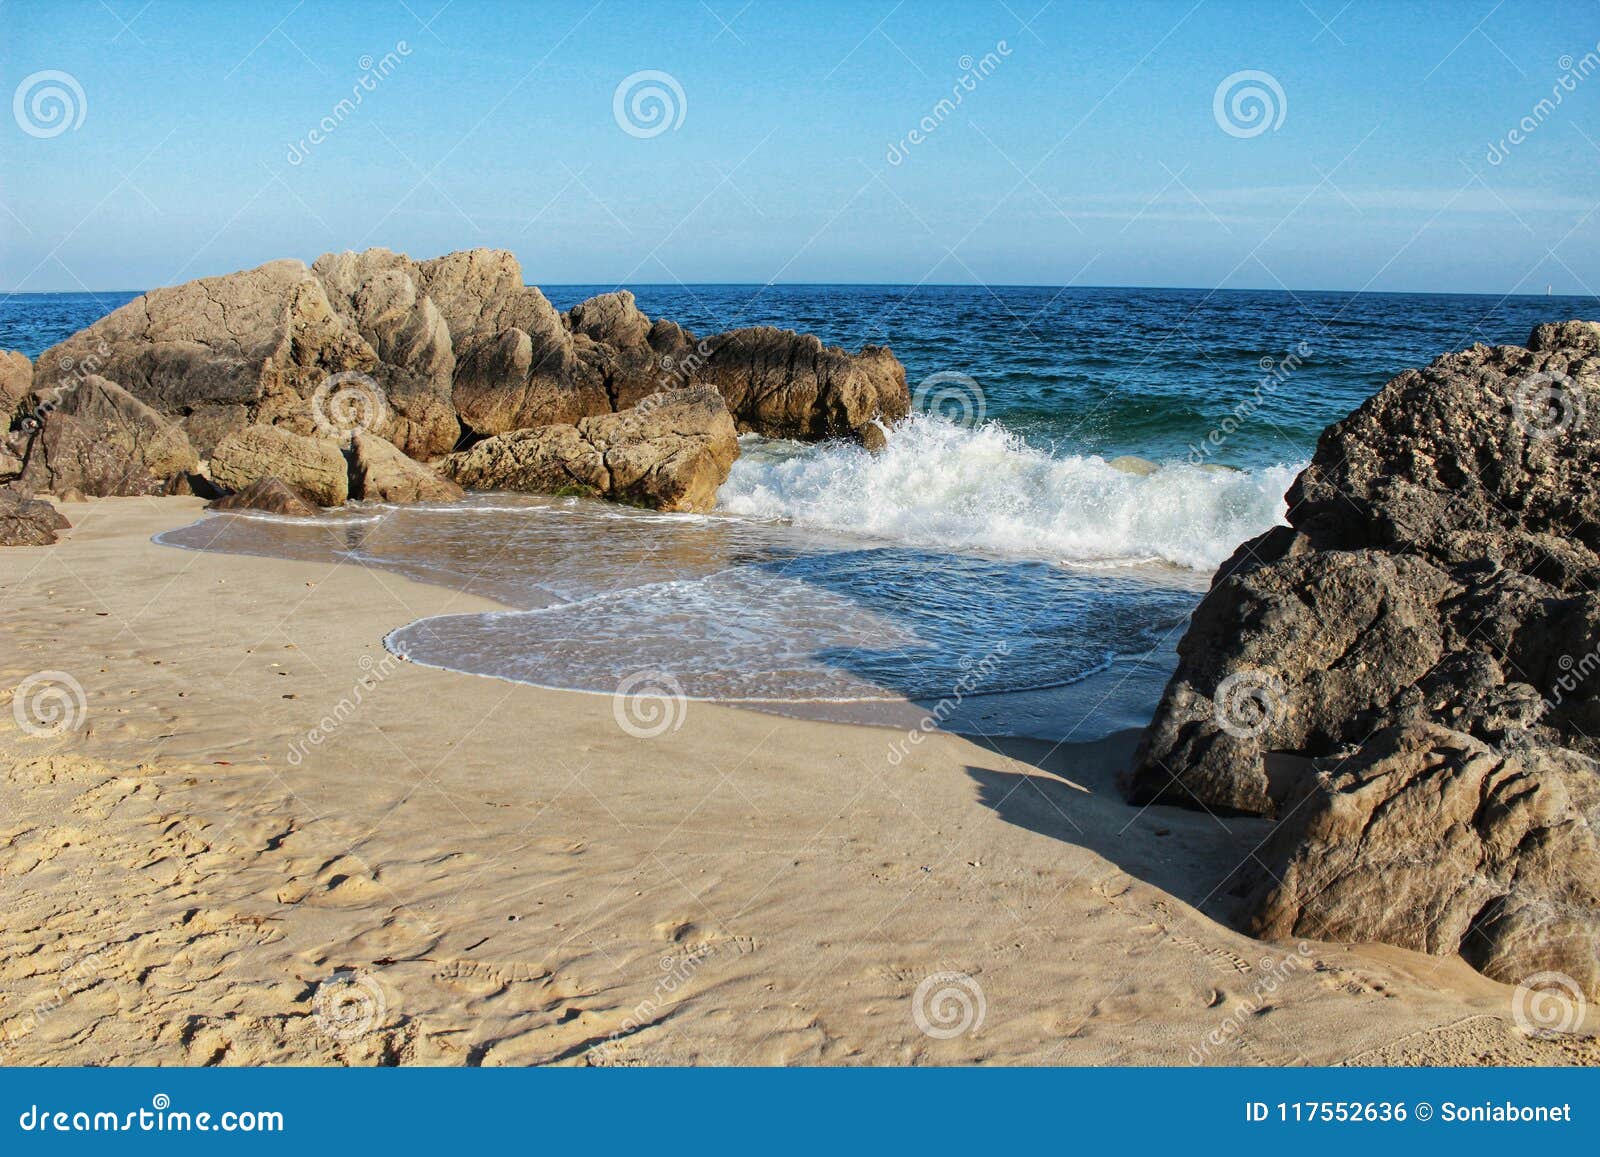 crystalline waters and rock textures of galapinhos beach